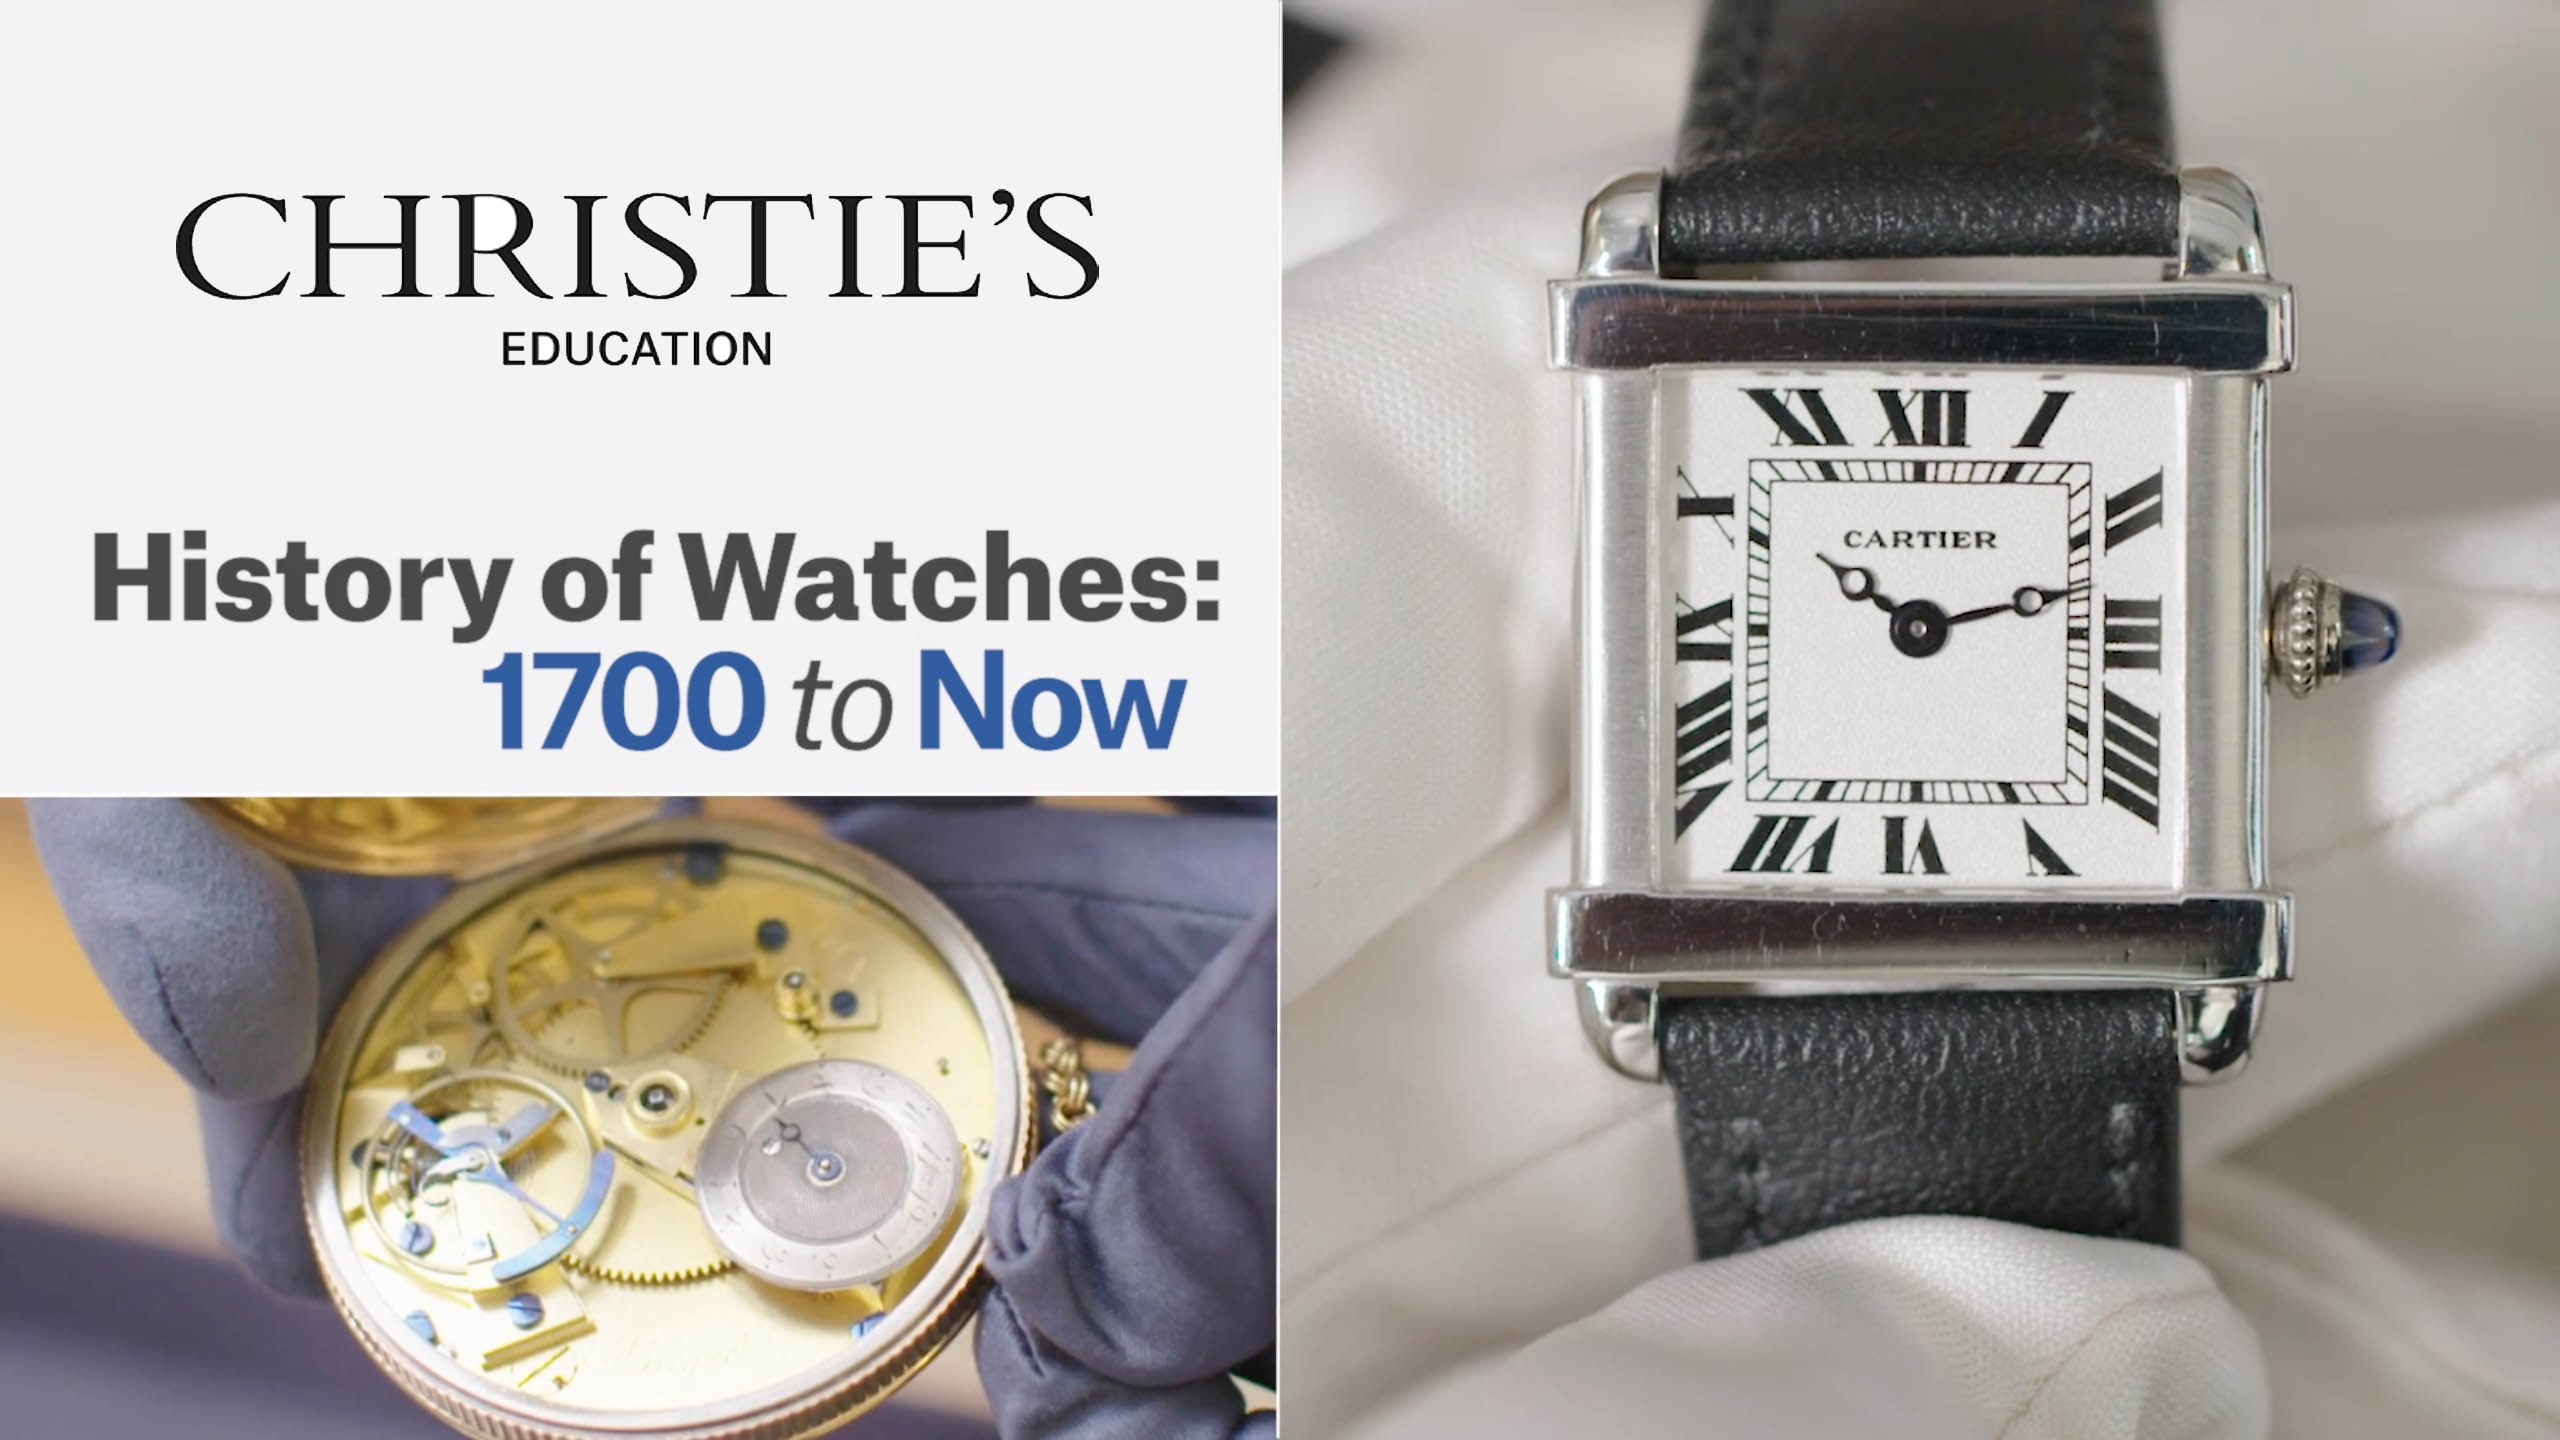 Online Course - Explore the History of Watches from 1700 to Now With Christie's Education